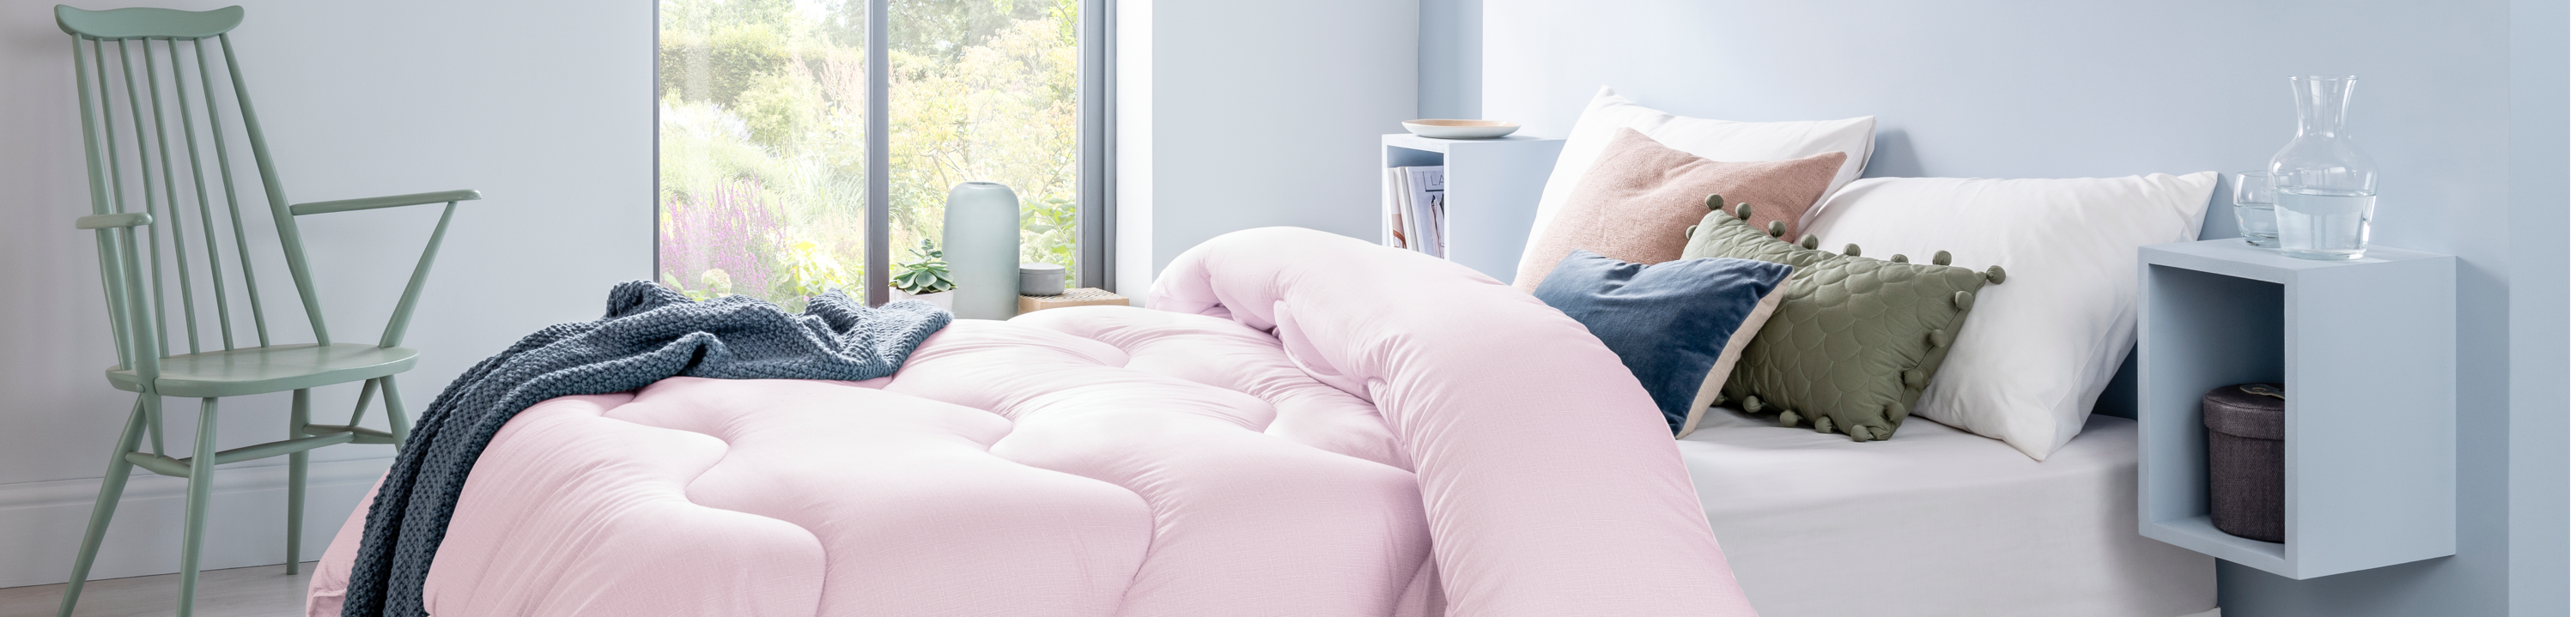 A coverless Night Owl duvet in the colour dusk pink on double bed in a Scandinavian style bedroom